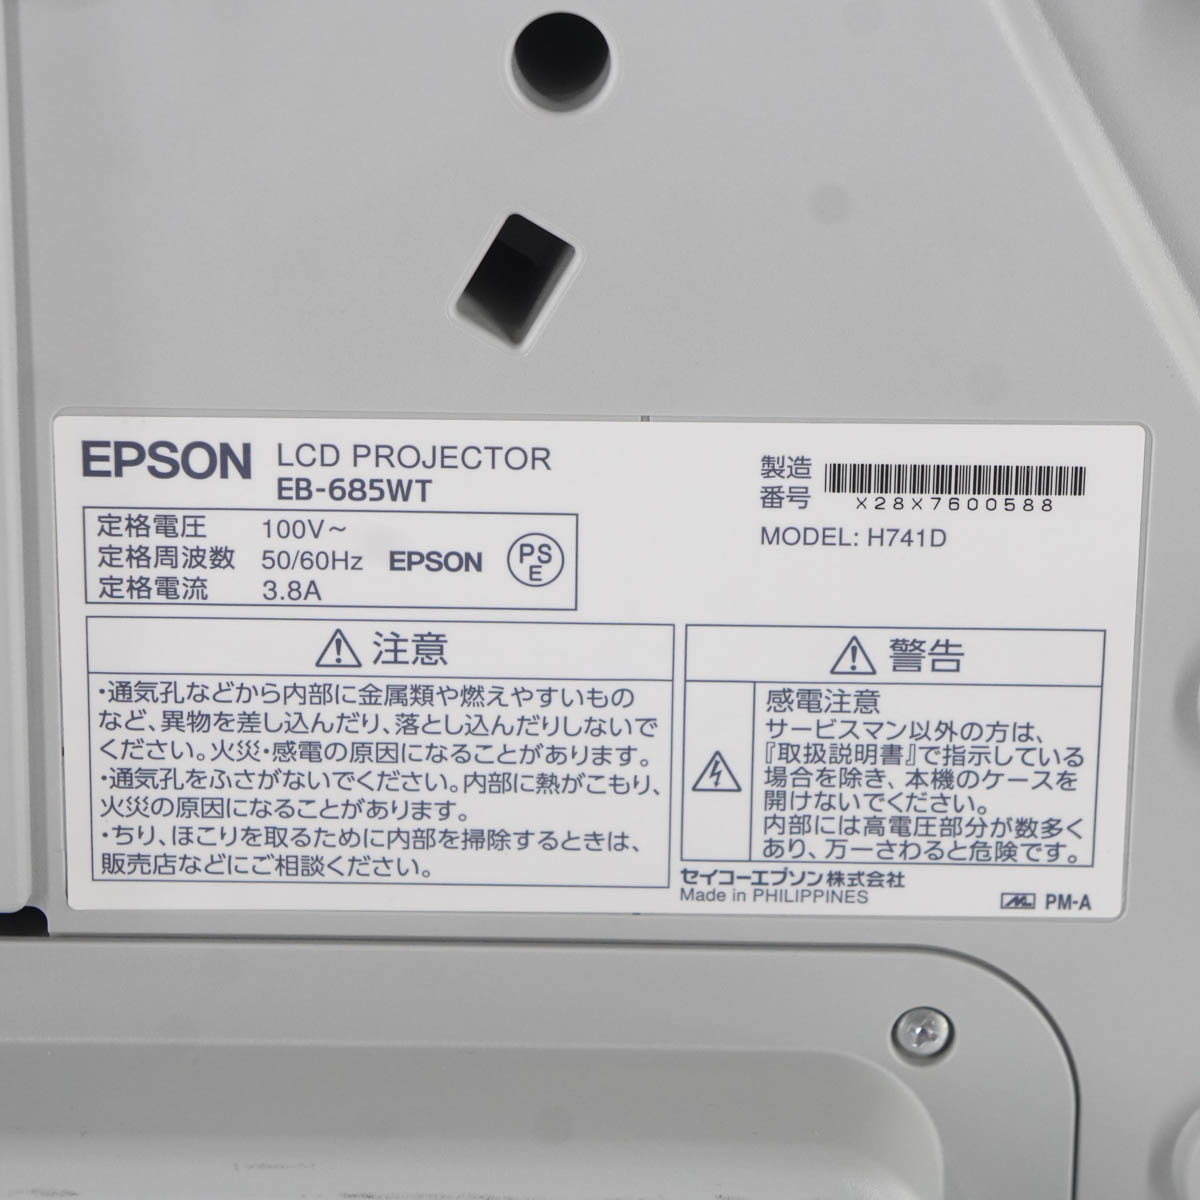 PG]USED 8日保証 ランプ1081時間 EPSON EB-685WT H741D LCD PROJECTOR 